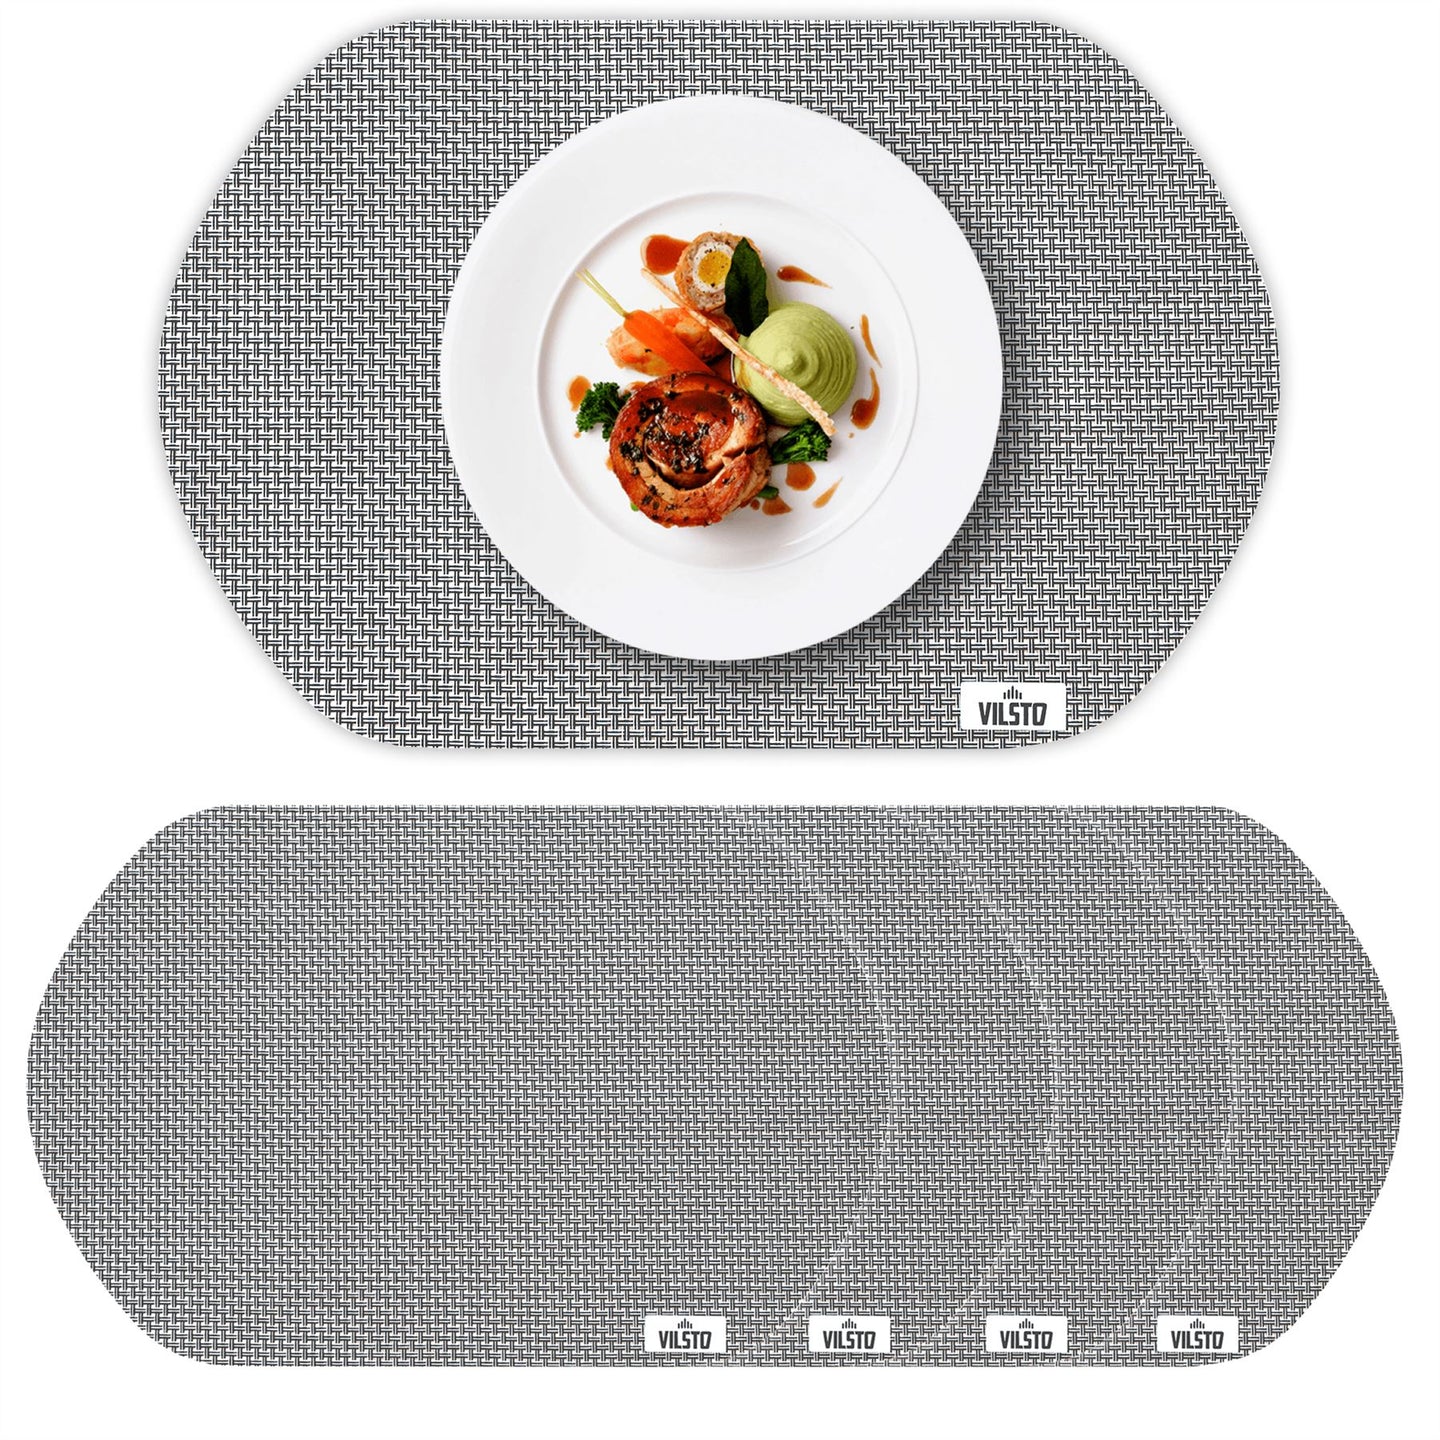 VILSTO Dining Table Place Mats, PVC Table Protector Heat Resistant, Plastic Tablecloth, Dinner Set Table Mats, Round Placemats Set of 4, Grey